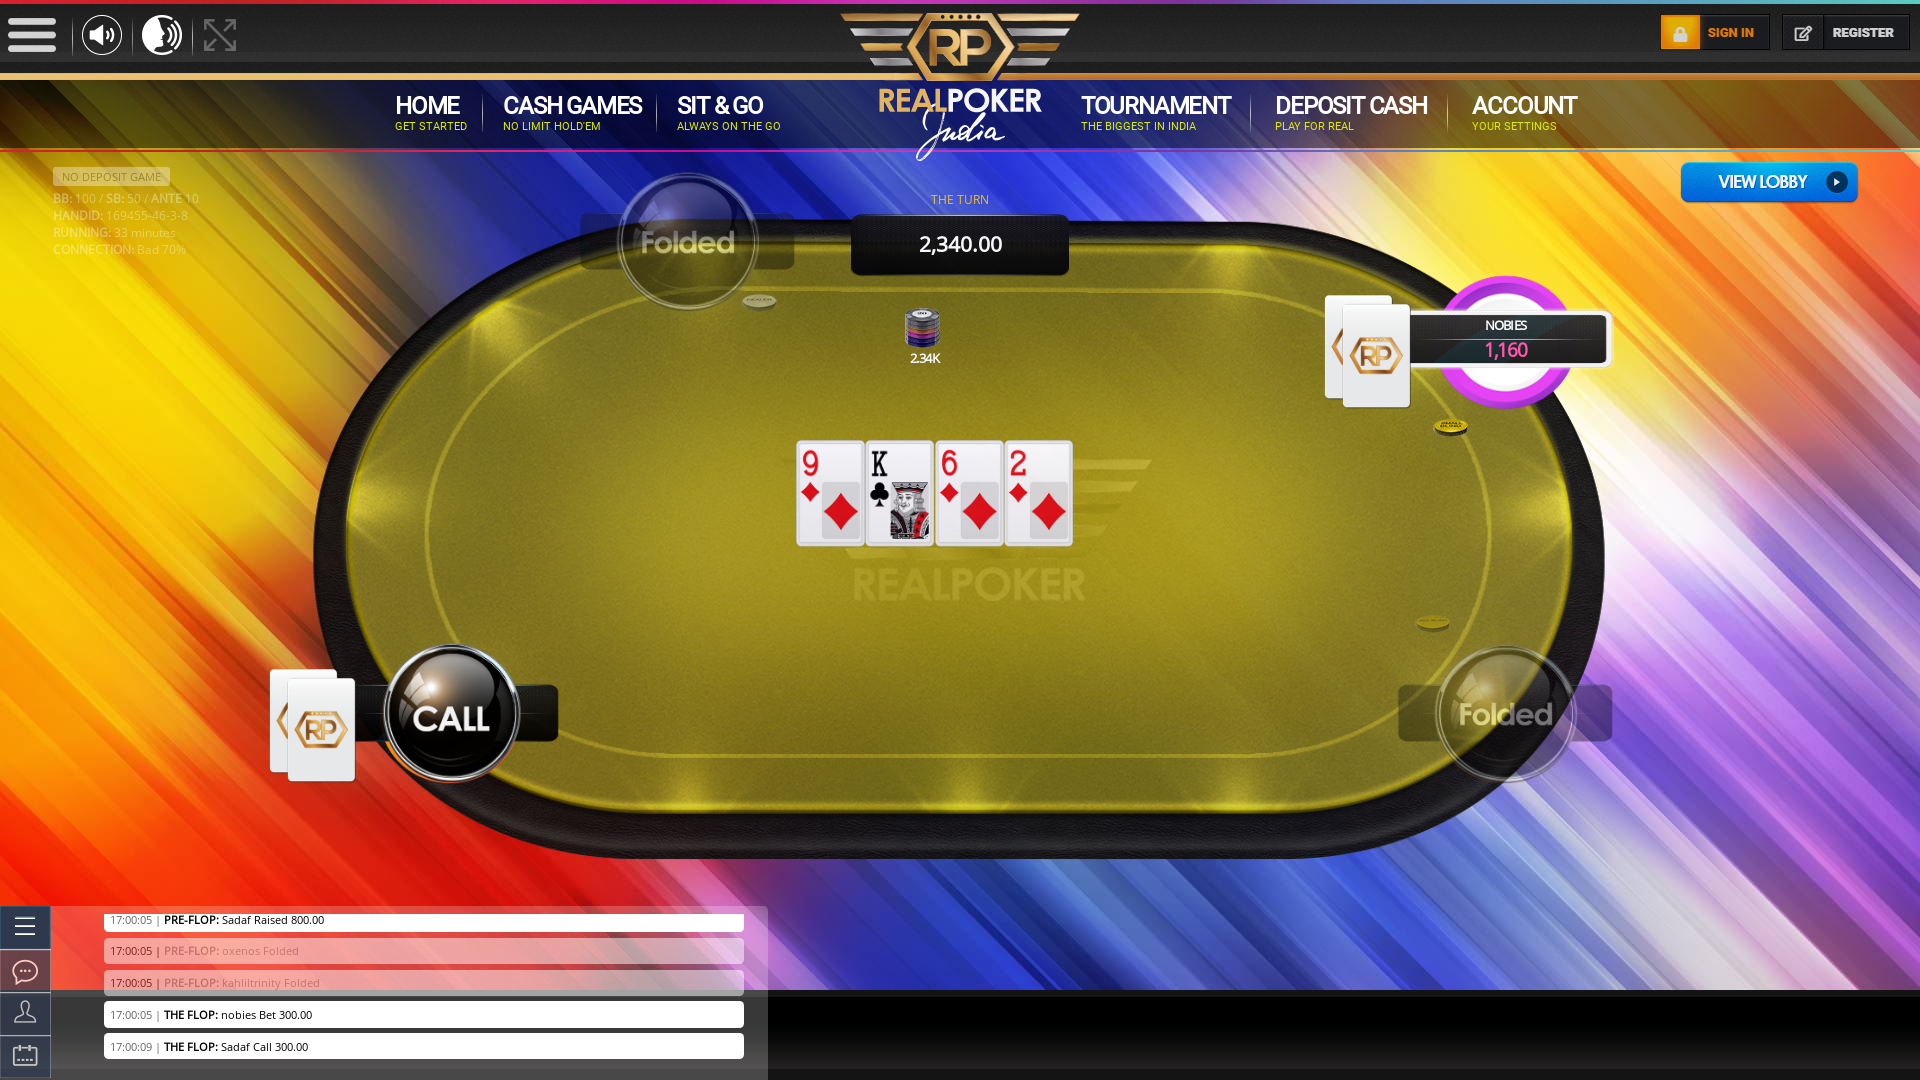 The 46th hand dealt between Sadaf, oxenos, kahliltrinity, nobies,  on poker india